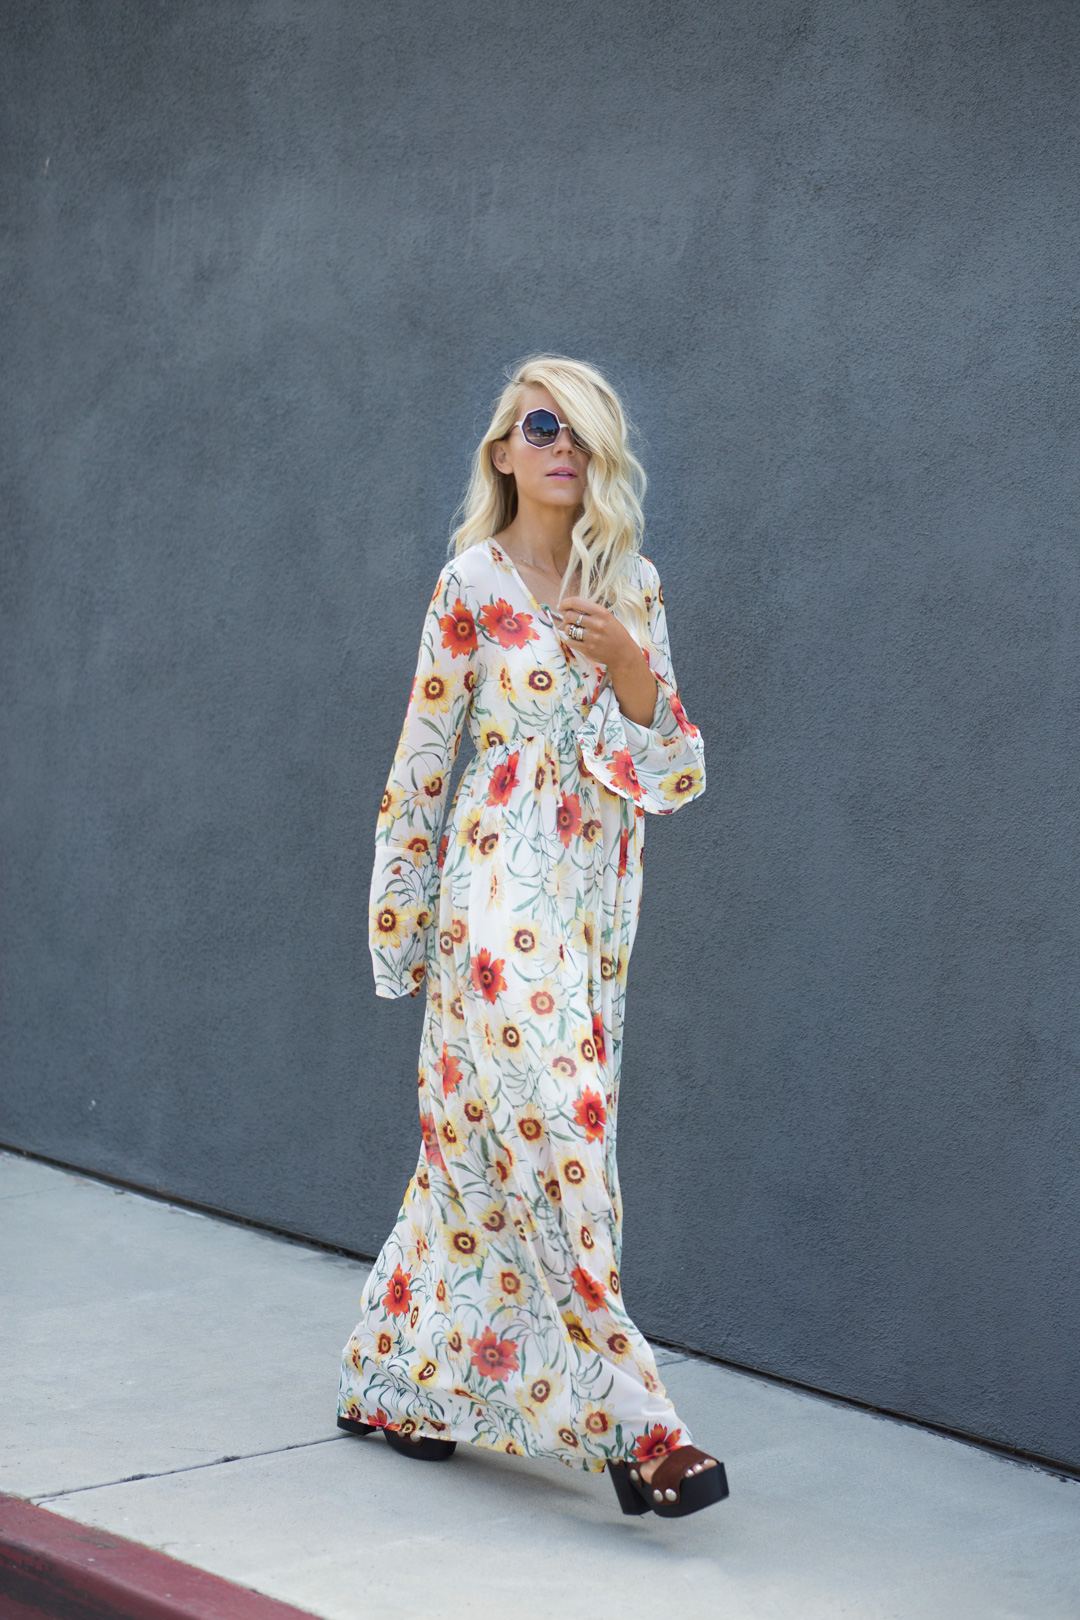 lisa allen of lunchpails and lipstick wearing a floral maxi dress from wildfox with wooden platforms by prada and Raen sunglasses in Encinitas CA 